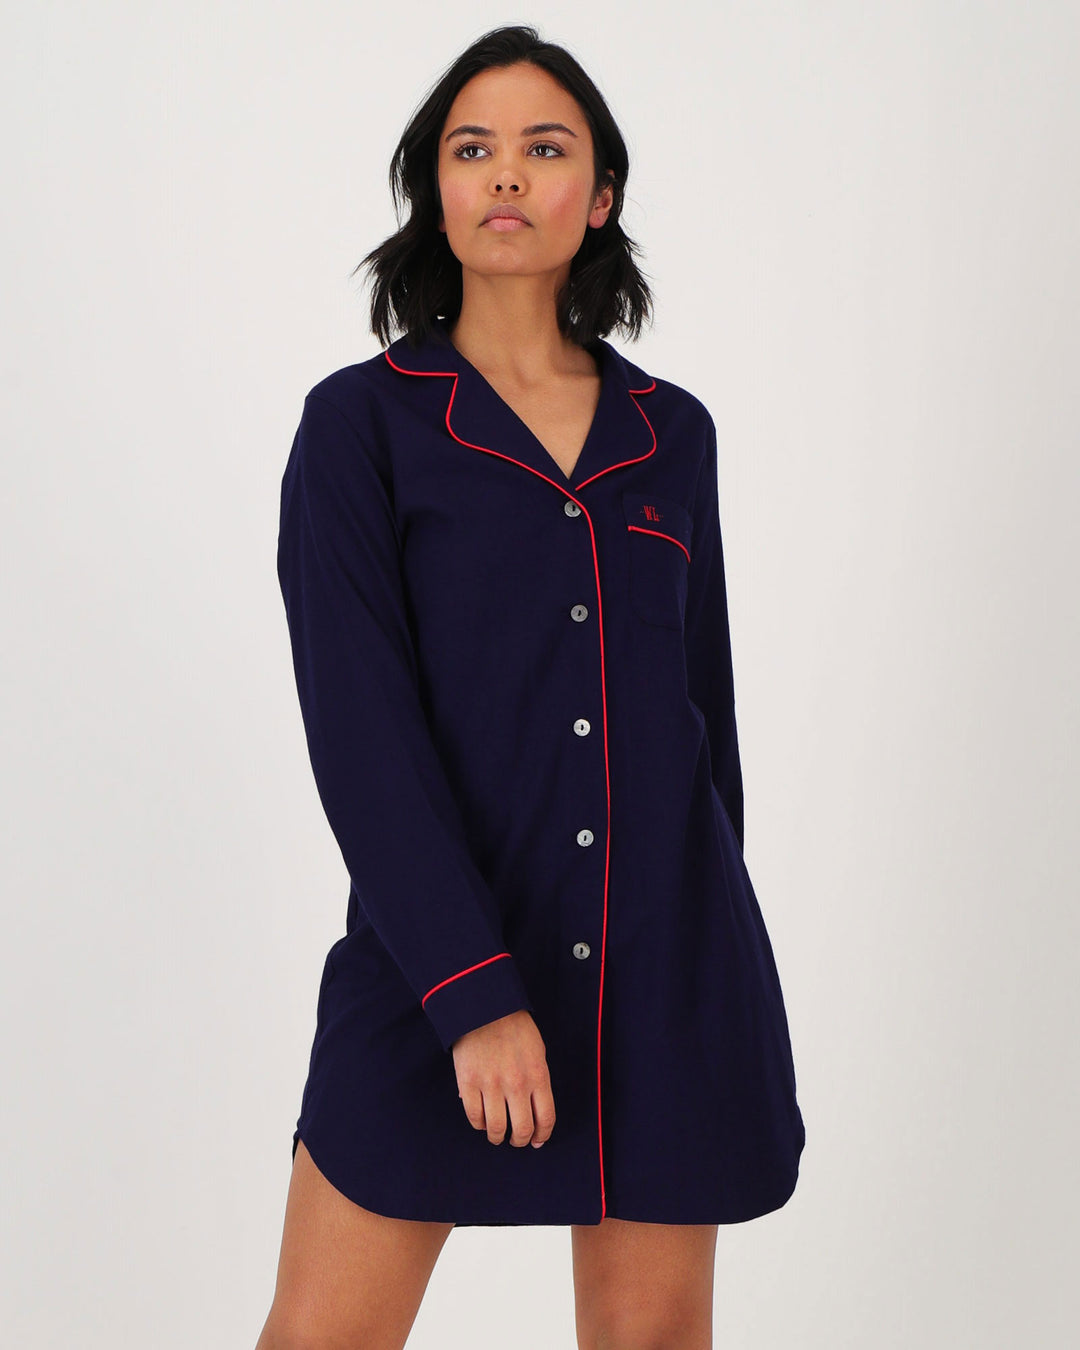 Womens Flannel Sleep Shirt Navy with Red Piping Front - Woodstock Laundry SA